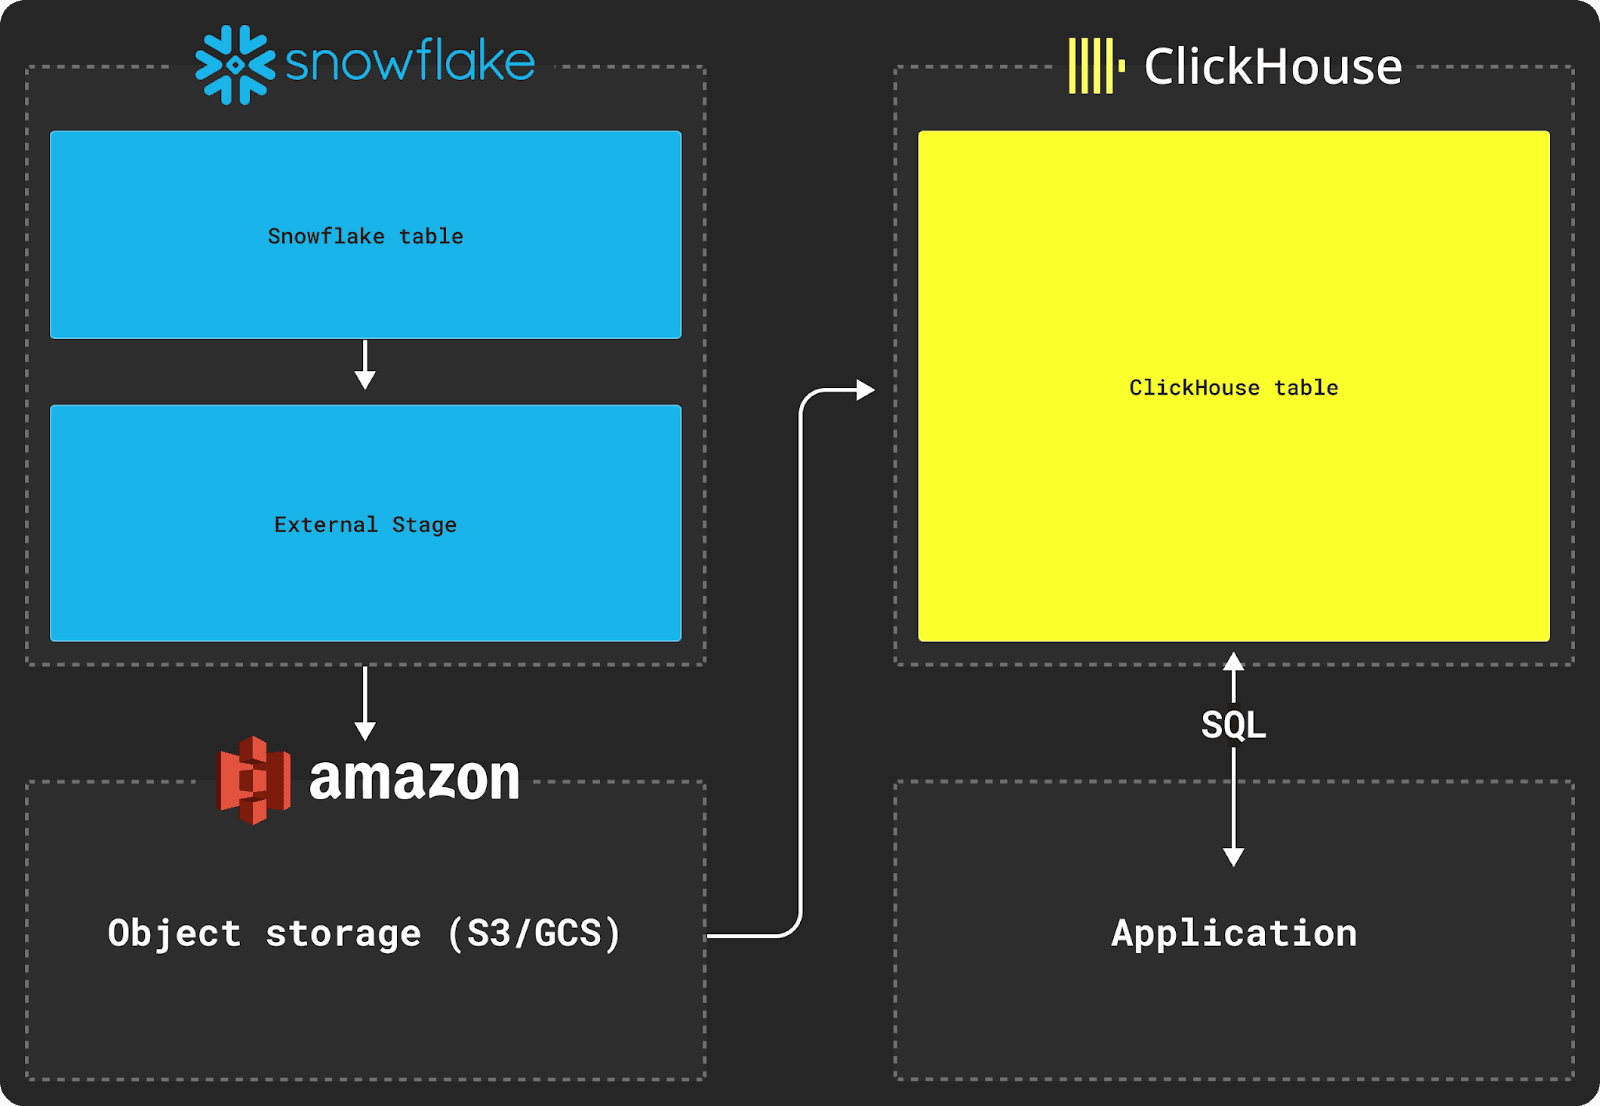 Migrating from Snowflake to ClickHouse